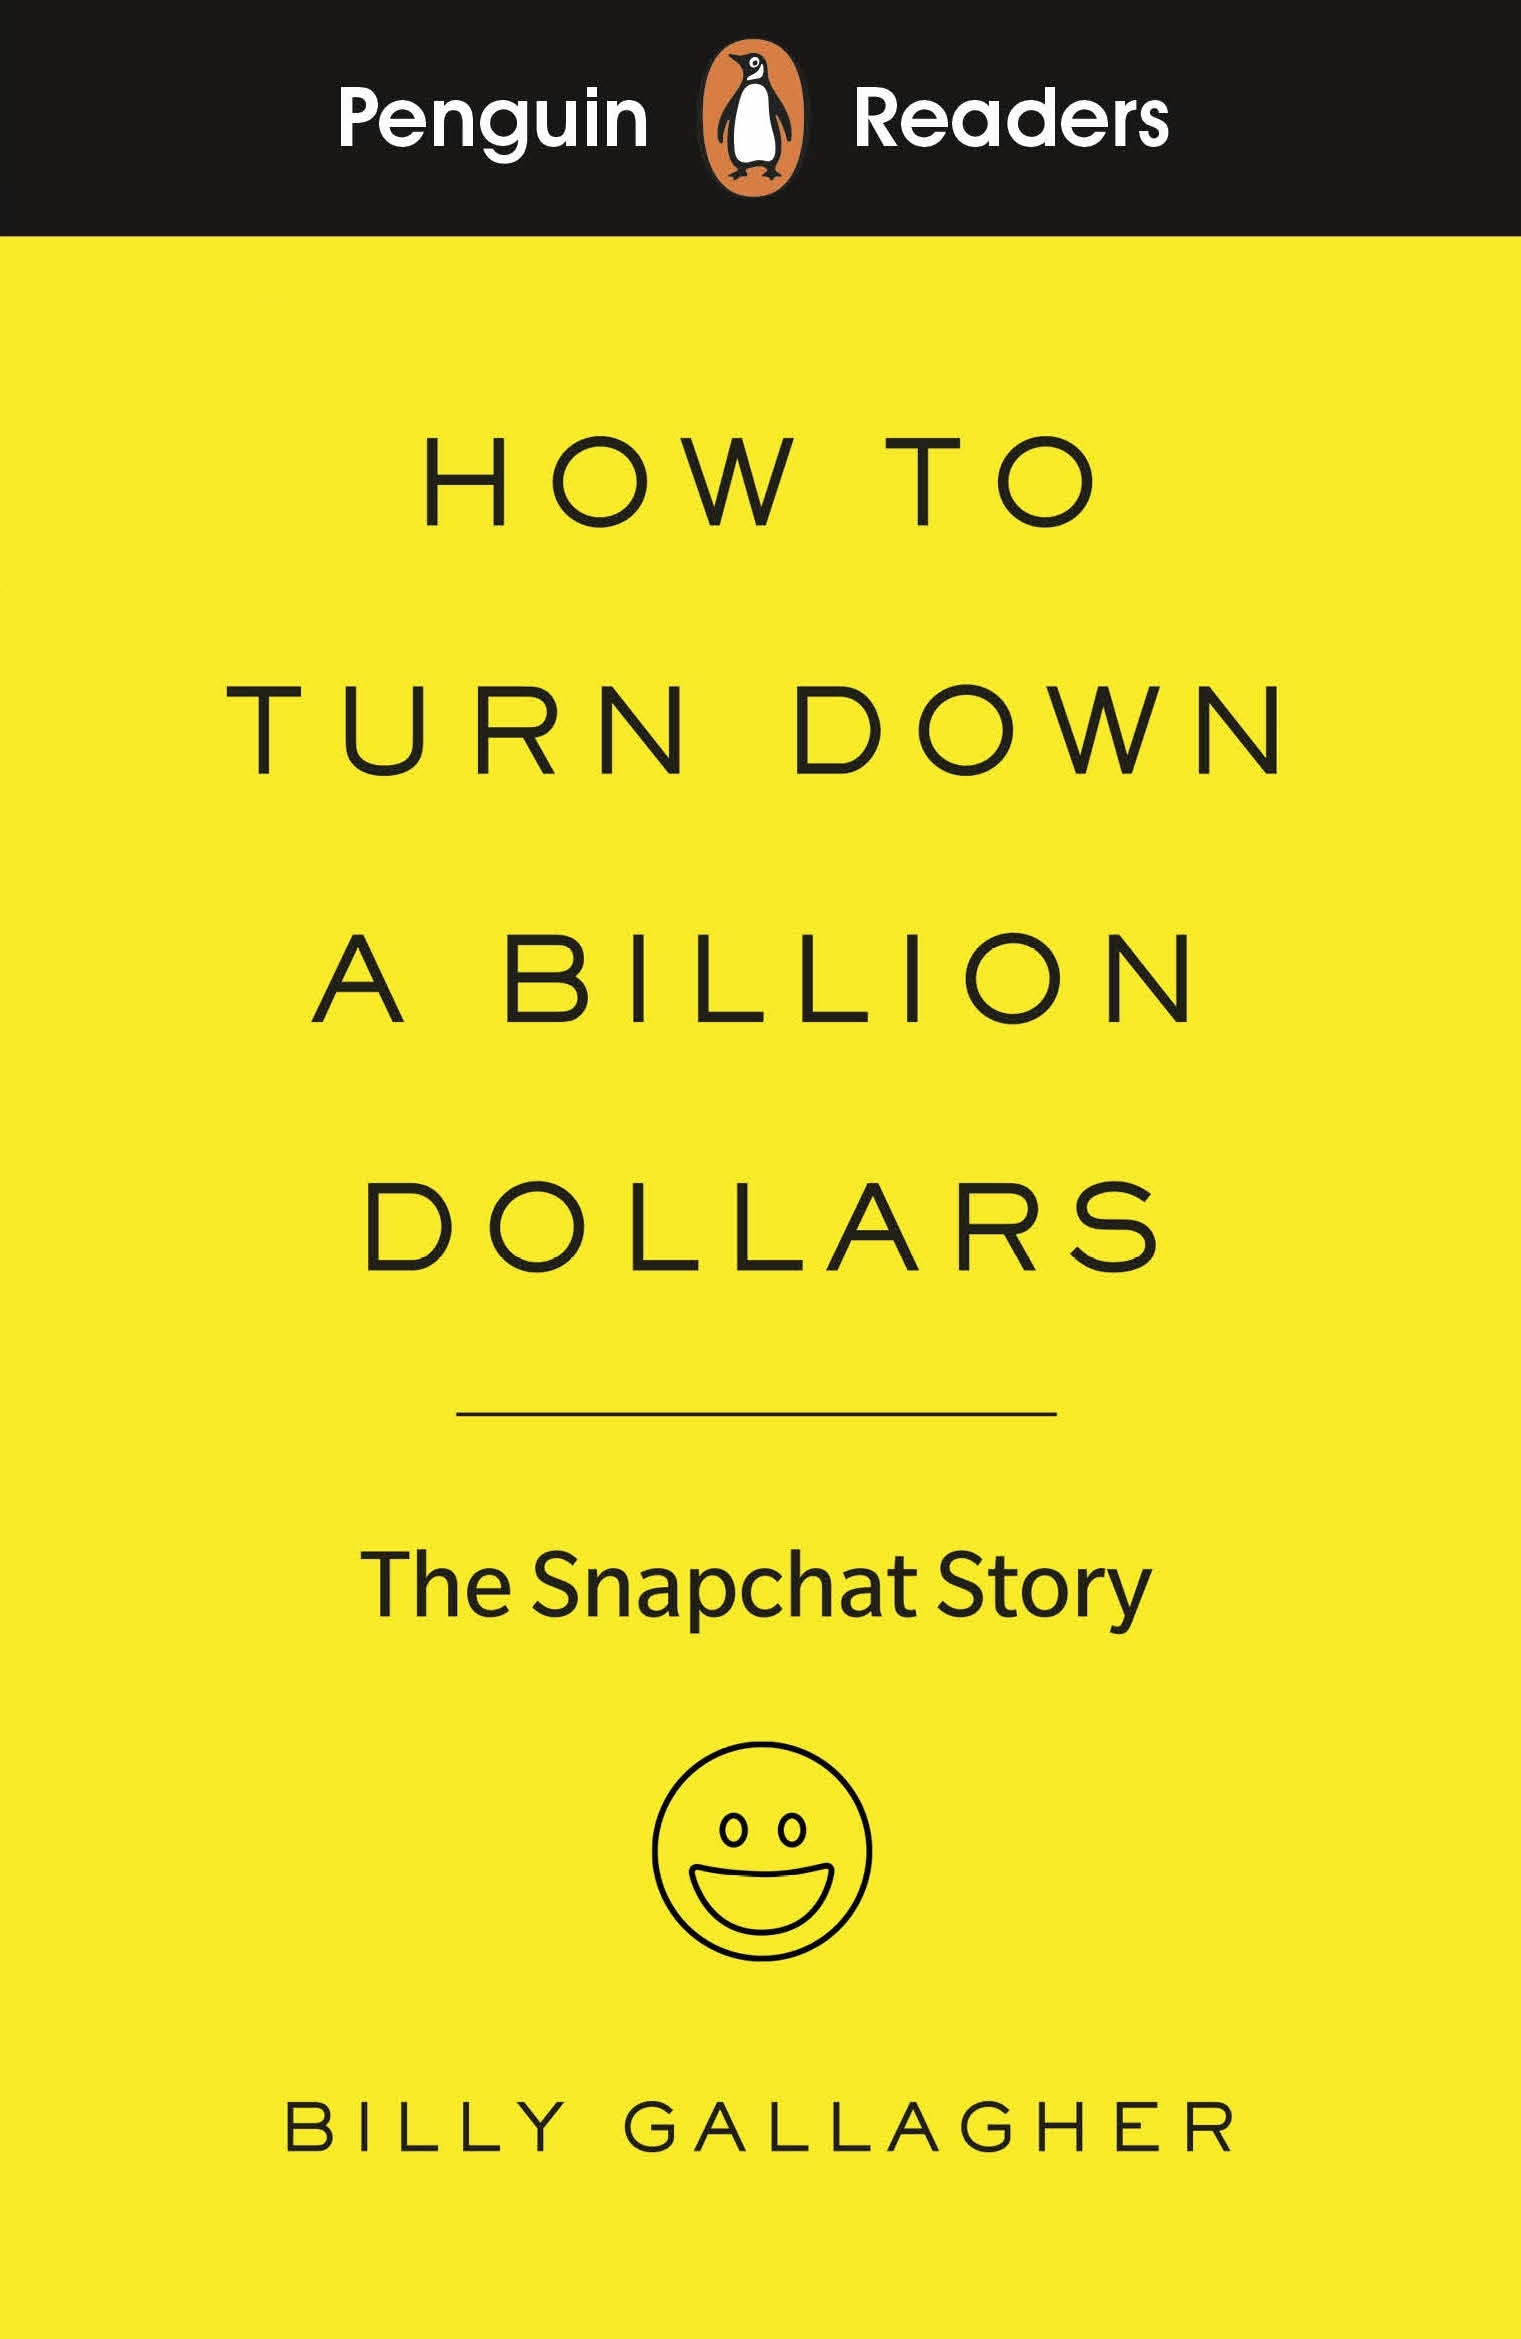 Book “Penguin Readers Level 2: How to Turn Down a Billion Dollars (ELT Graded Reader)” by Billy Gallagher — September 5, 2019